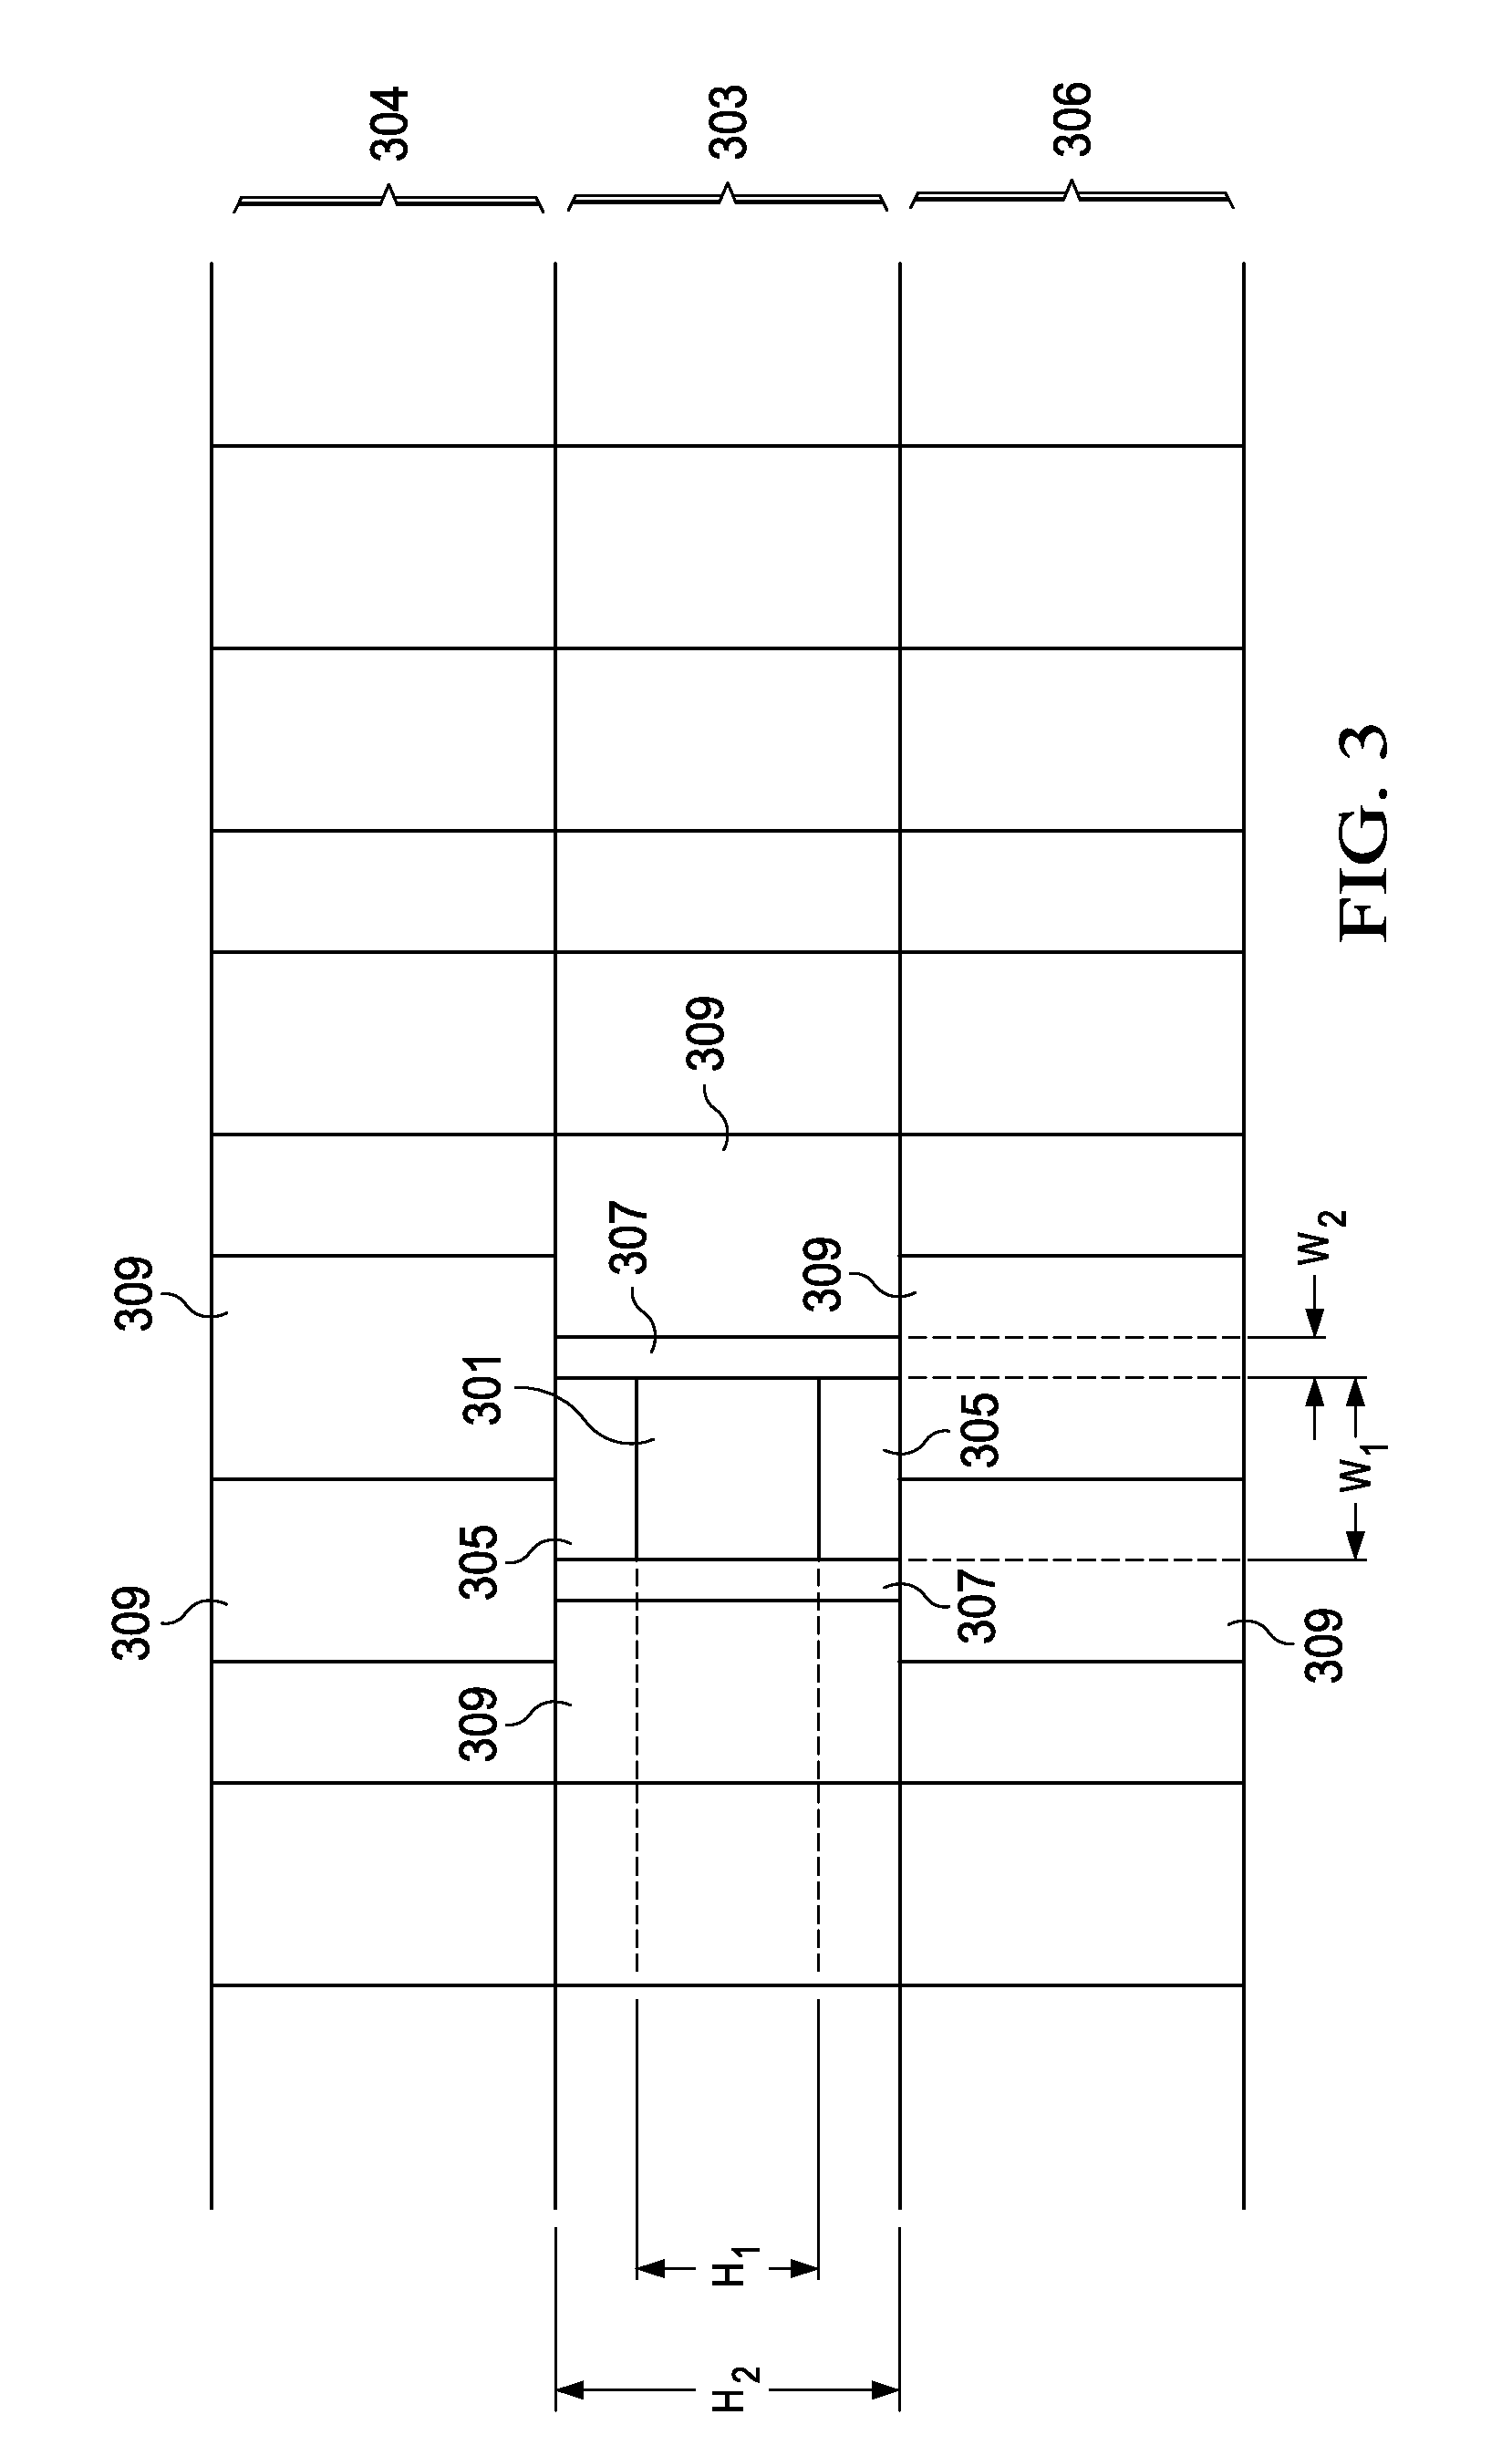 System and Method for Designing Cell Rows